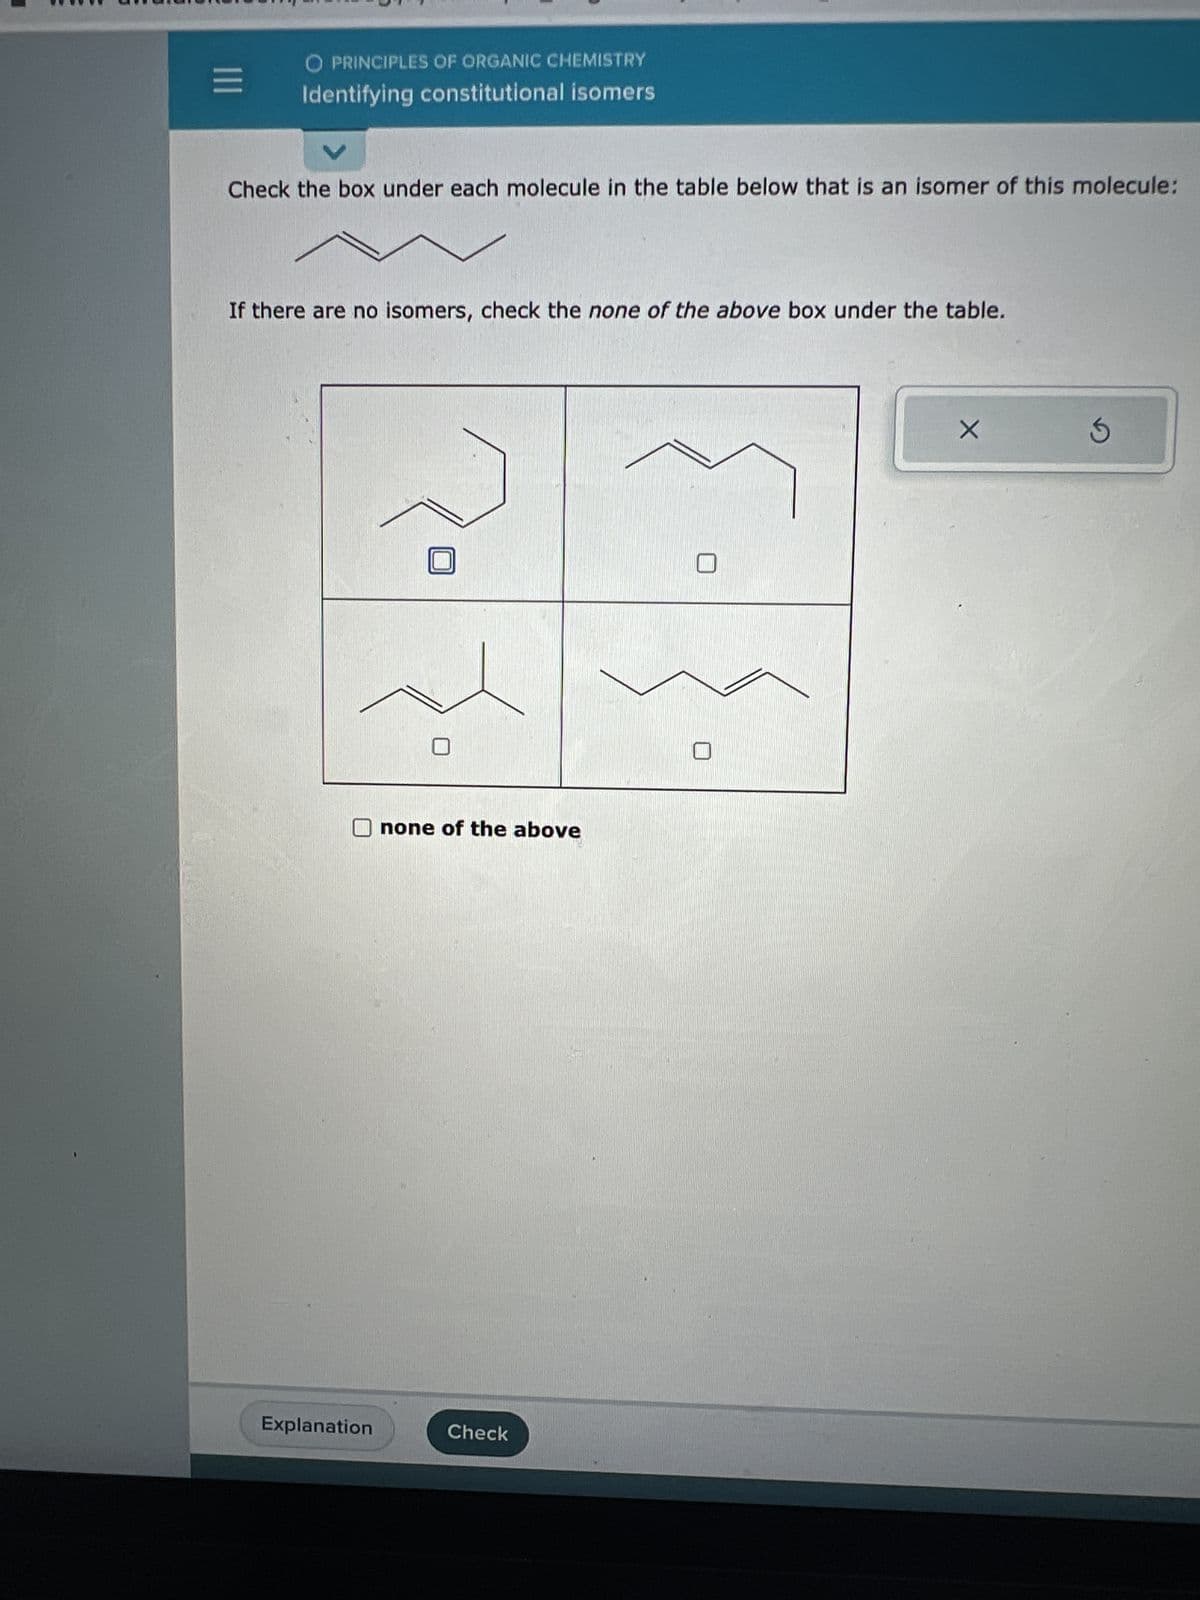 E
O PRINCIPLES OF ORGANIC CHEMISTRY
Identifying constitutional isomers
Check the box under each molecule in the table below that is an isomer of this molecule:
If there are no isomers, check the none of the above box under the table.
Explanation
none of the above
Check
X
S